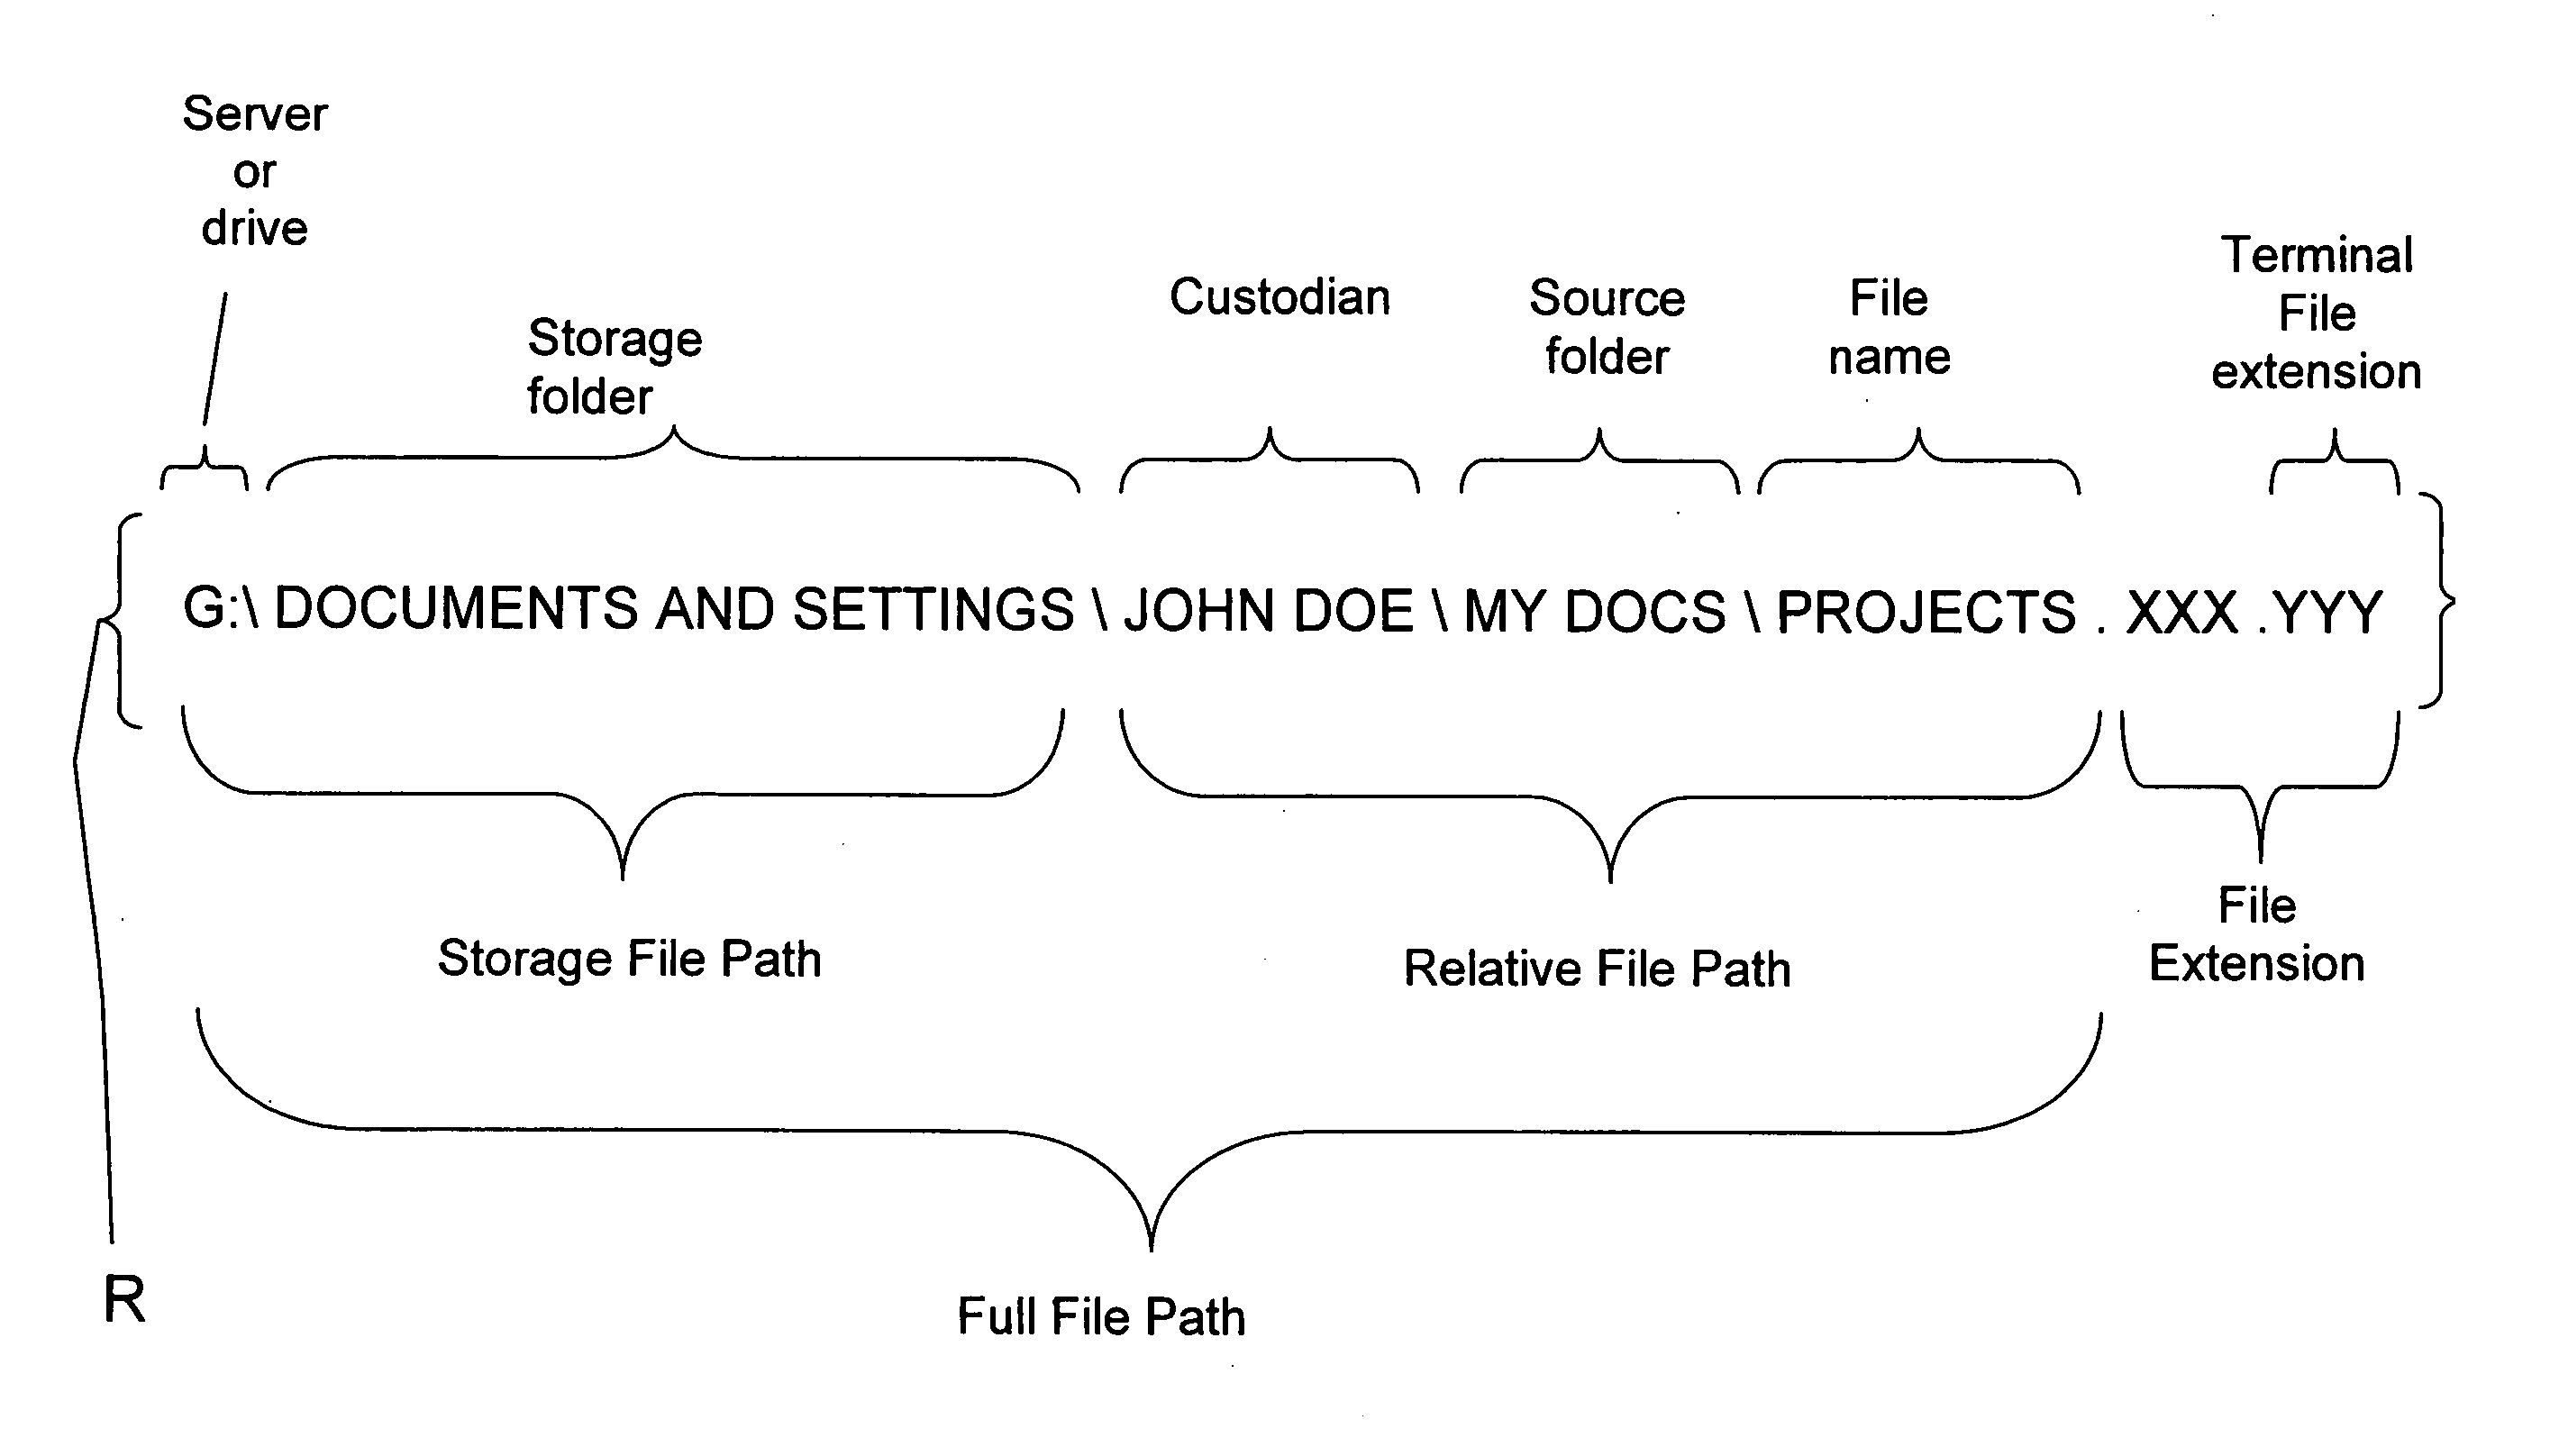 Data structure generated in accordance with a method for identifying electronic files using derivative attributes created from native file attributes